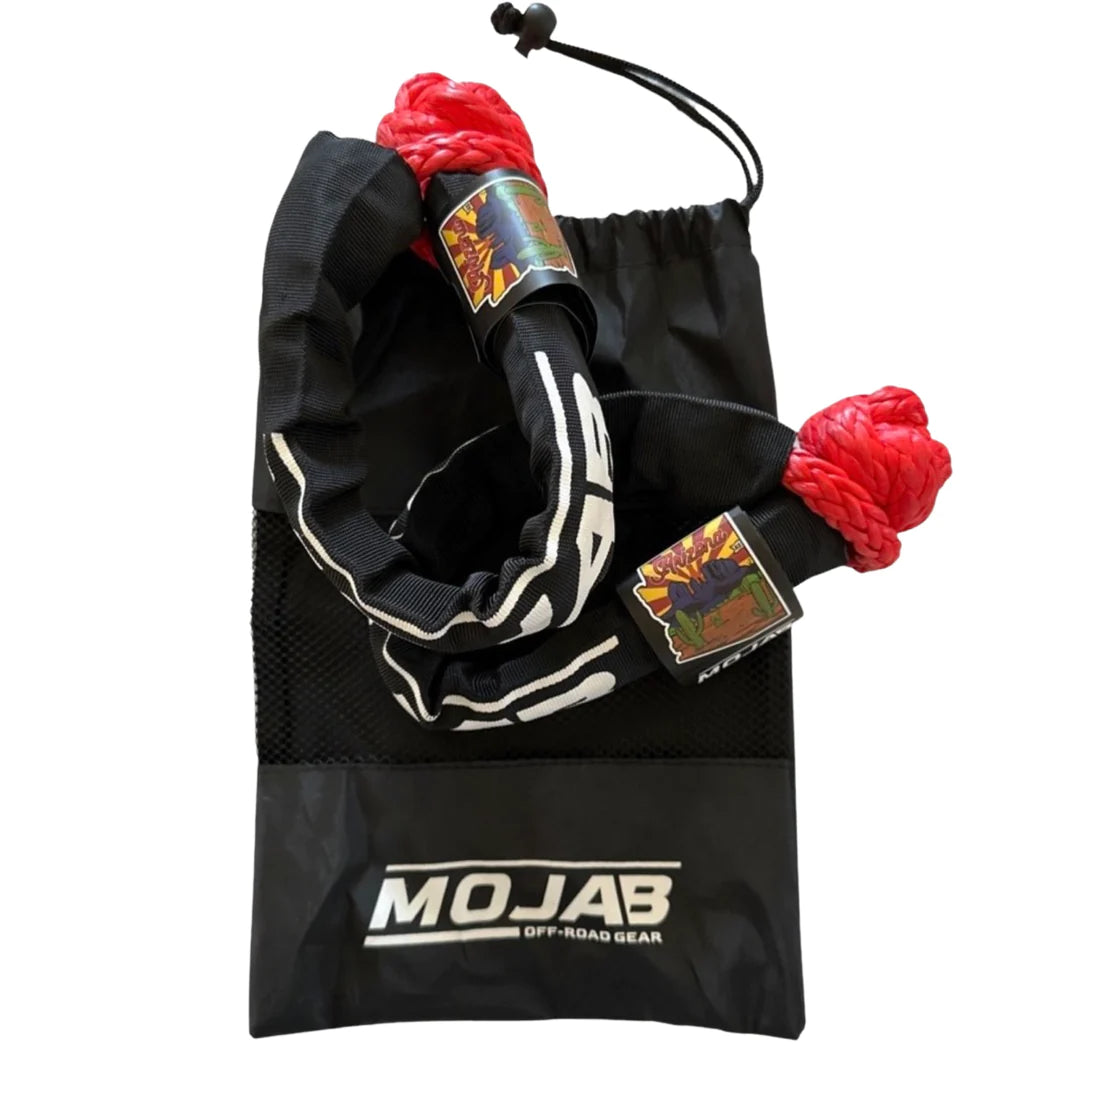 MOJAB OFFROAD Extreme Recovery Kit (14 items + 9 storage bags + 4 Velcro tapes) *Lifetime Warranty